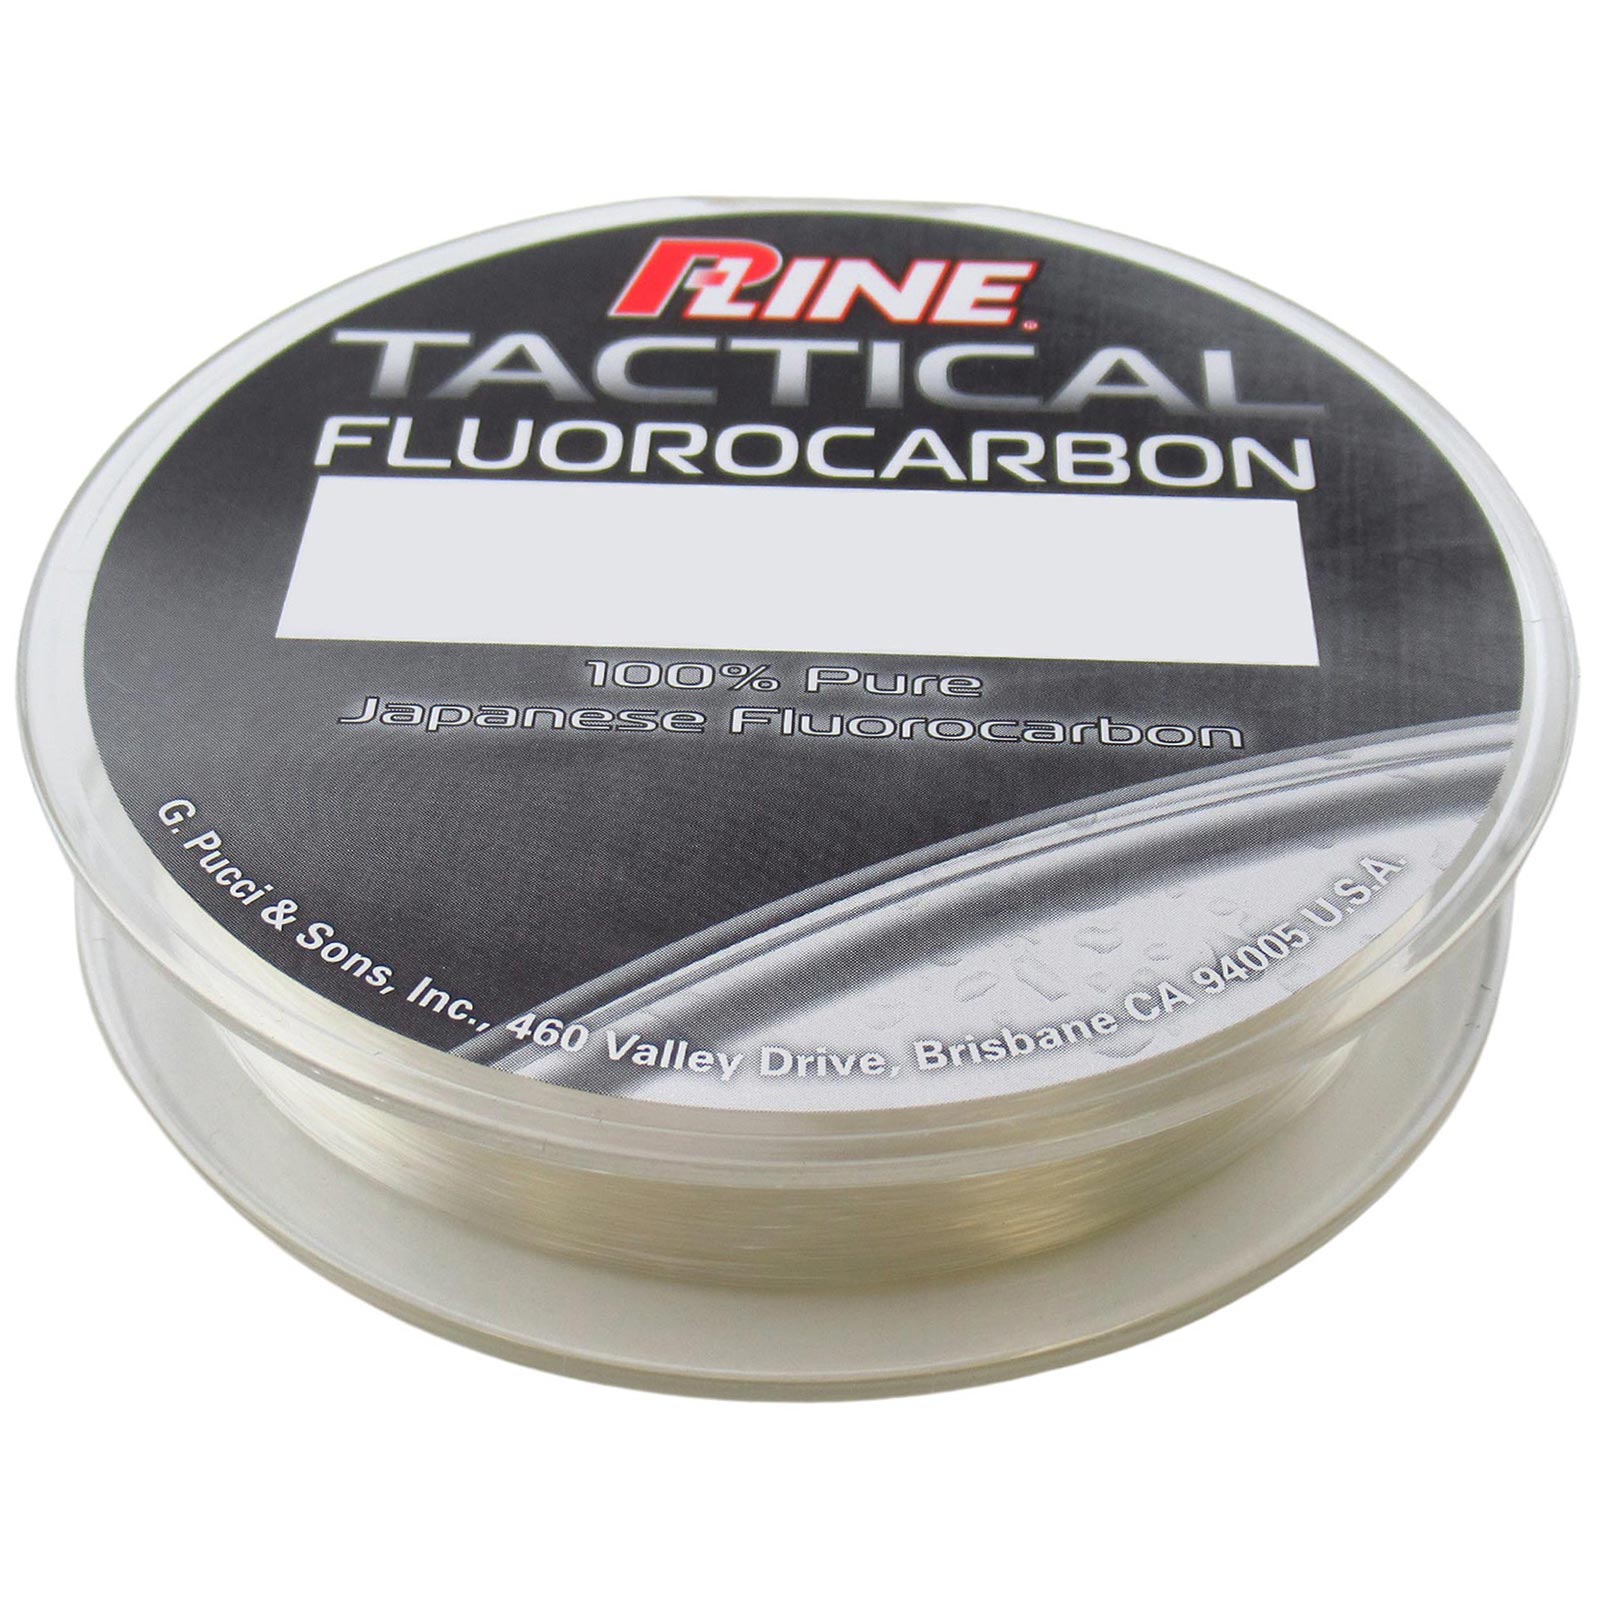  P-Line TWFC-15 Twfc-15 Lb 300Yd Topwater Copolymer : Sports &  Outdoors